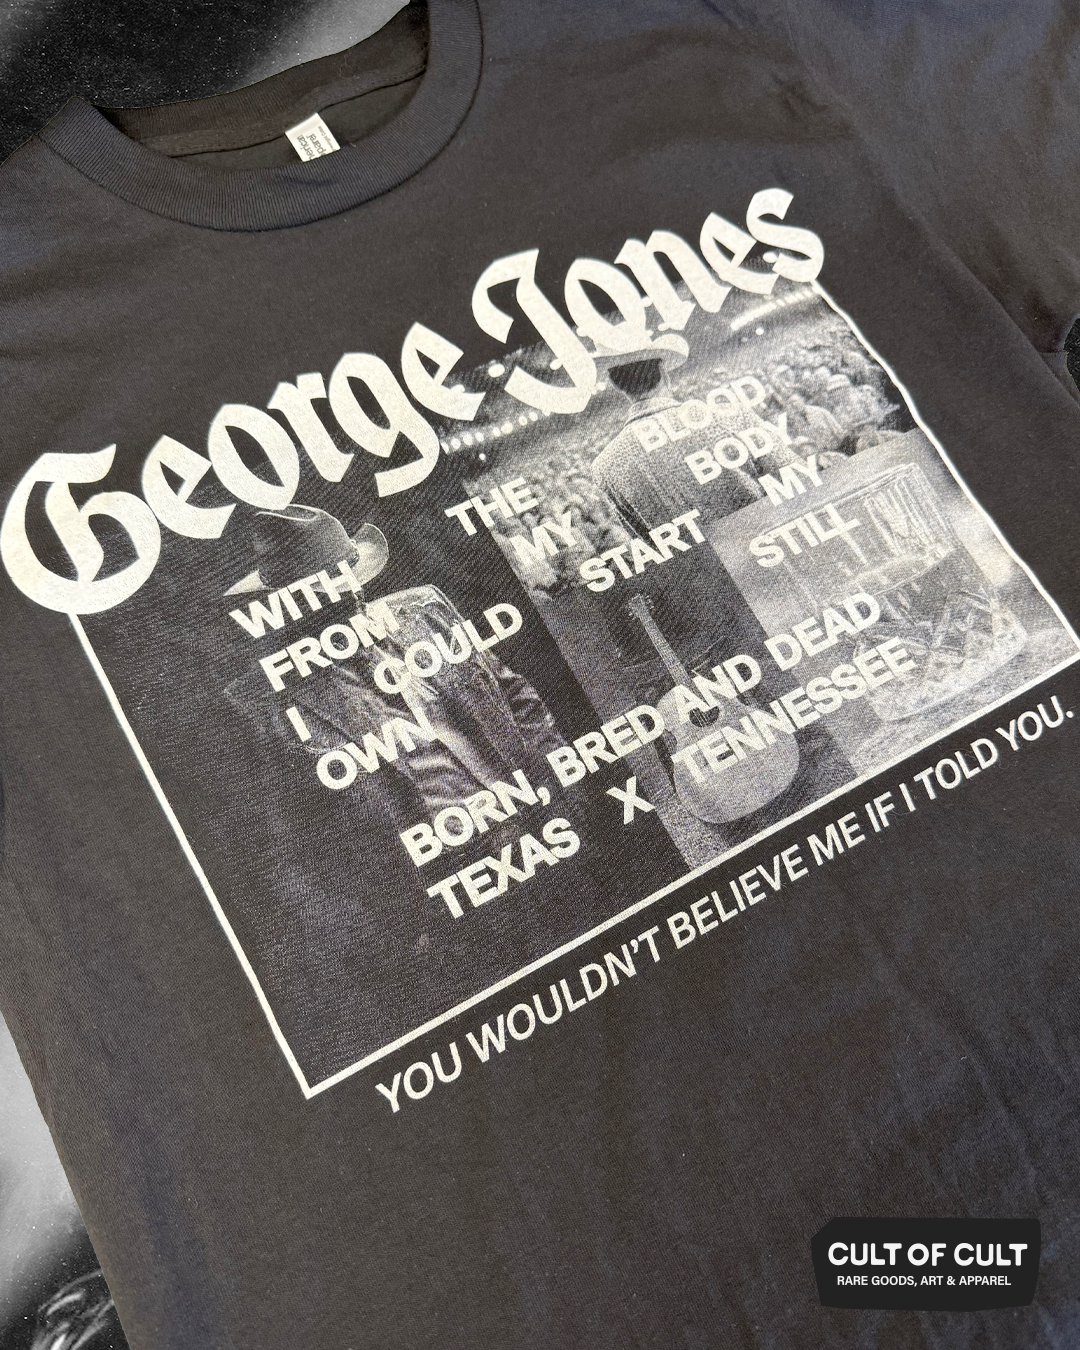 a detailed view of the George Jones Born Bred and Dead black short sleeve shirt